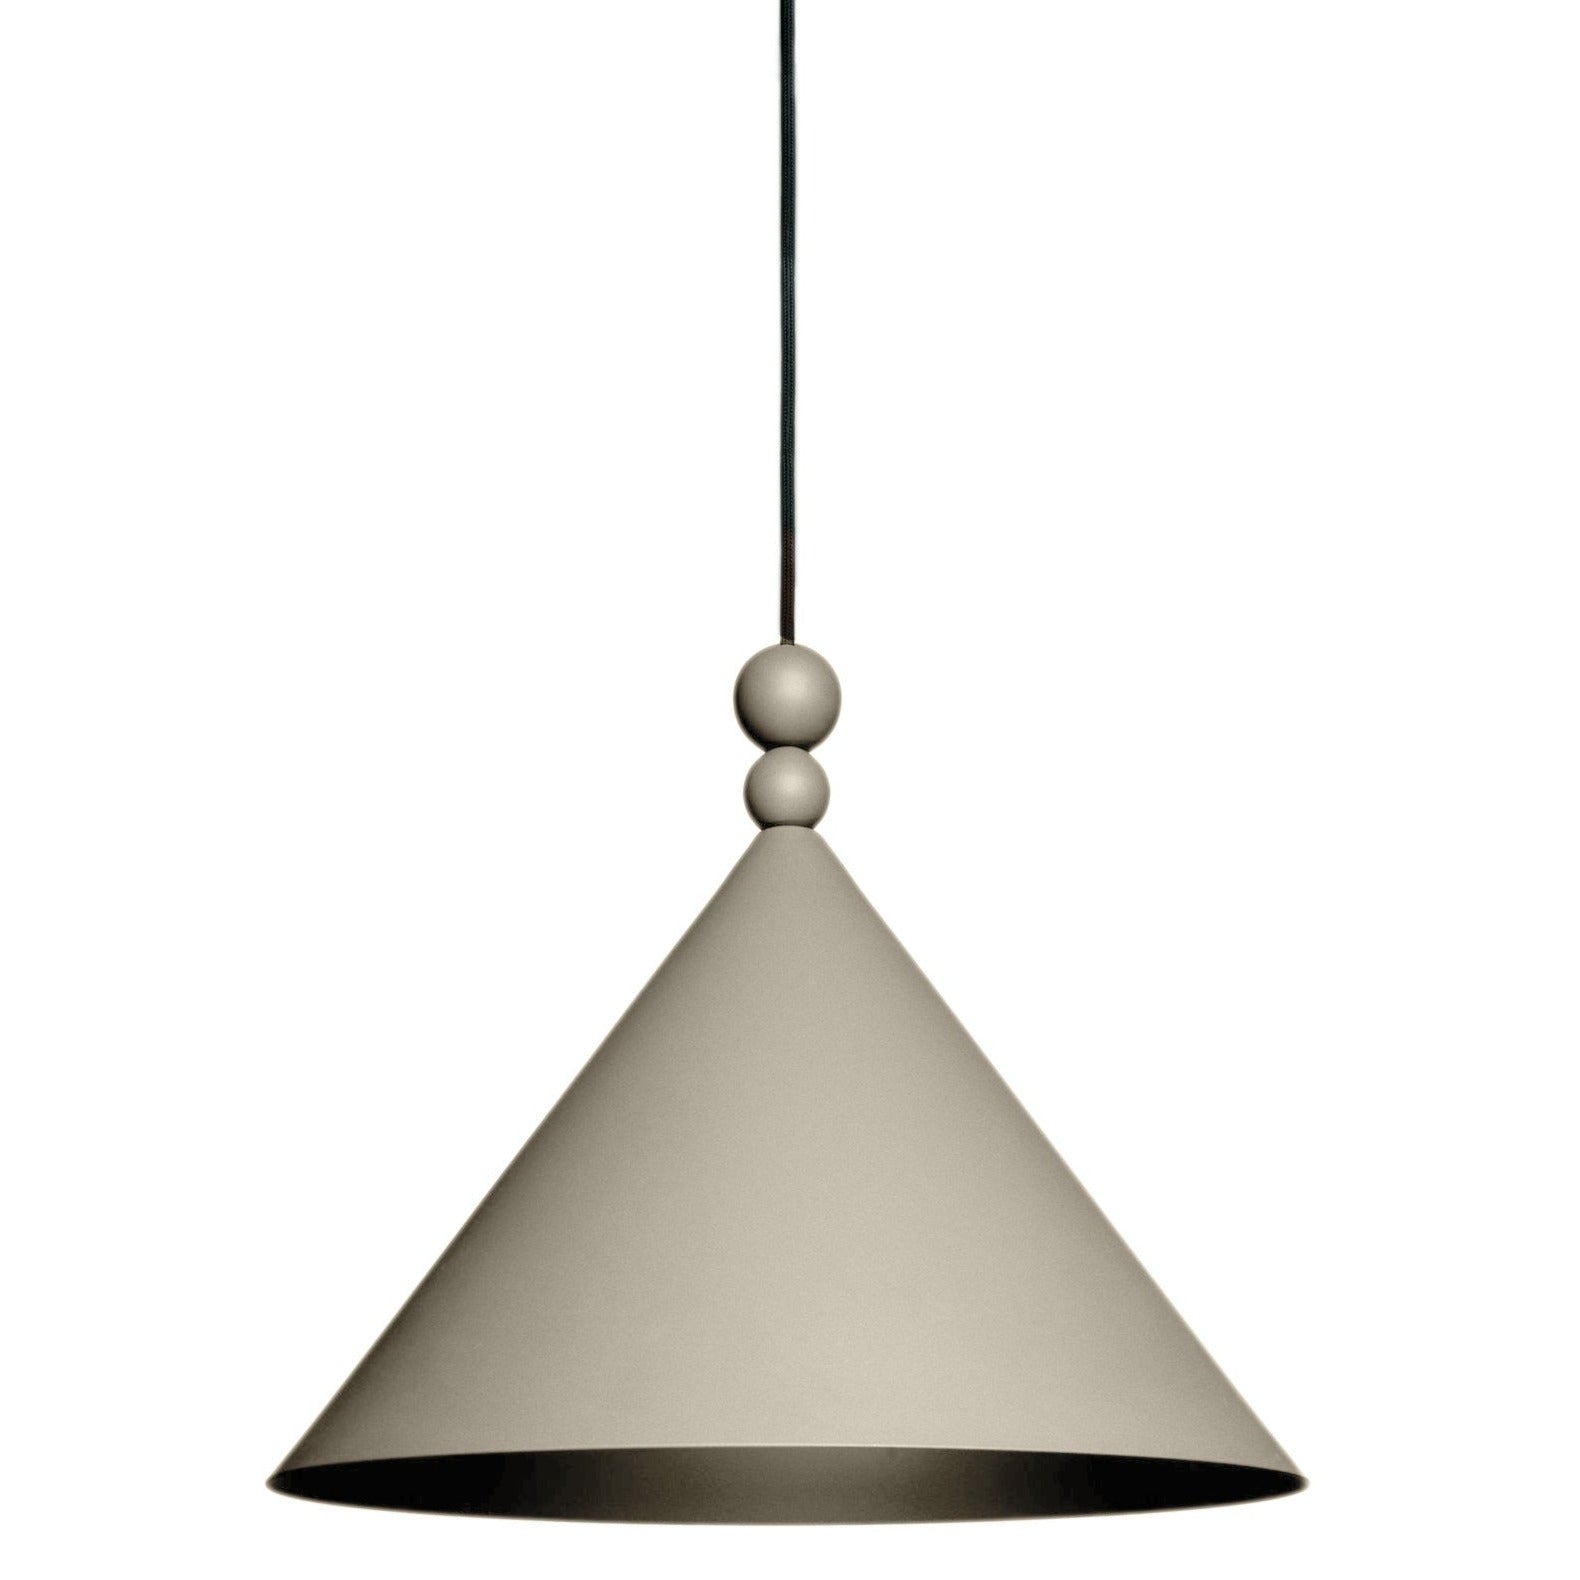 A designer hanging lamp is a proposal for those who like to play with colors in the interior. The simple, classic shape of the aluminum lampshade has been completed in a very elegant way with a matte finish. Thanks to the ability to adjust the length of the cable, it is comprehensive. The table lighting during meals in the dining room with Scandinavian decor, or an interesting element of lighting, and by the way an addition over the kitchen island.